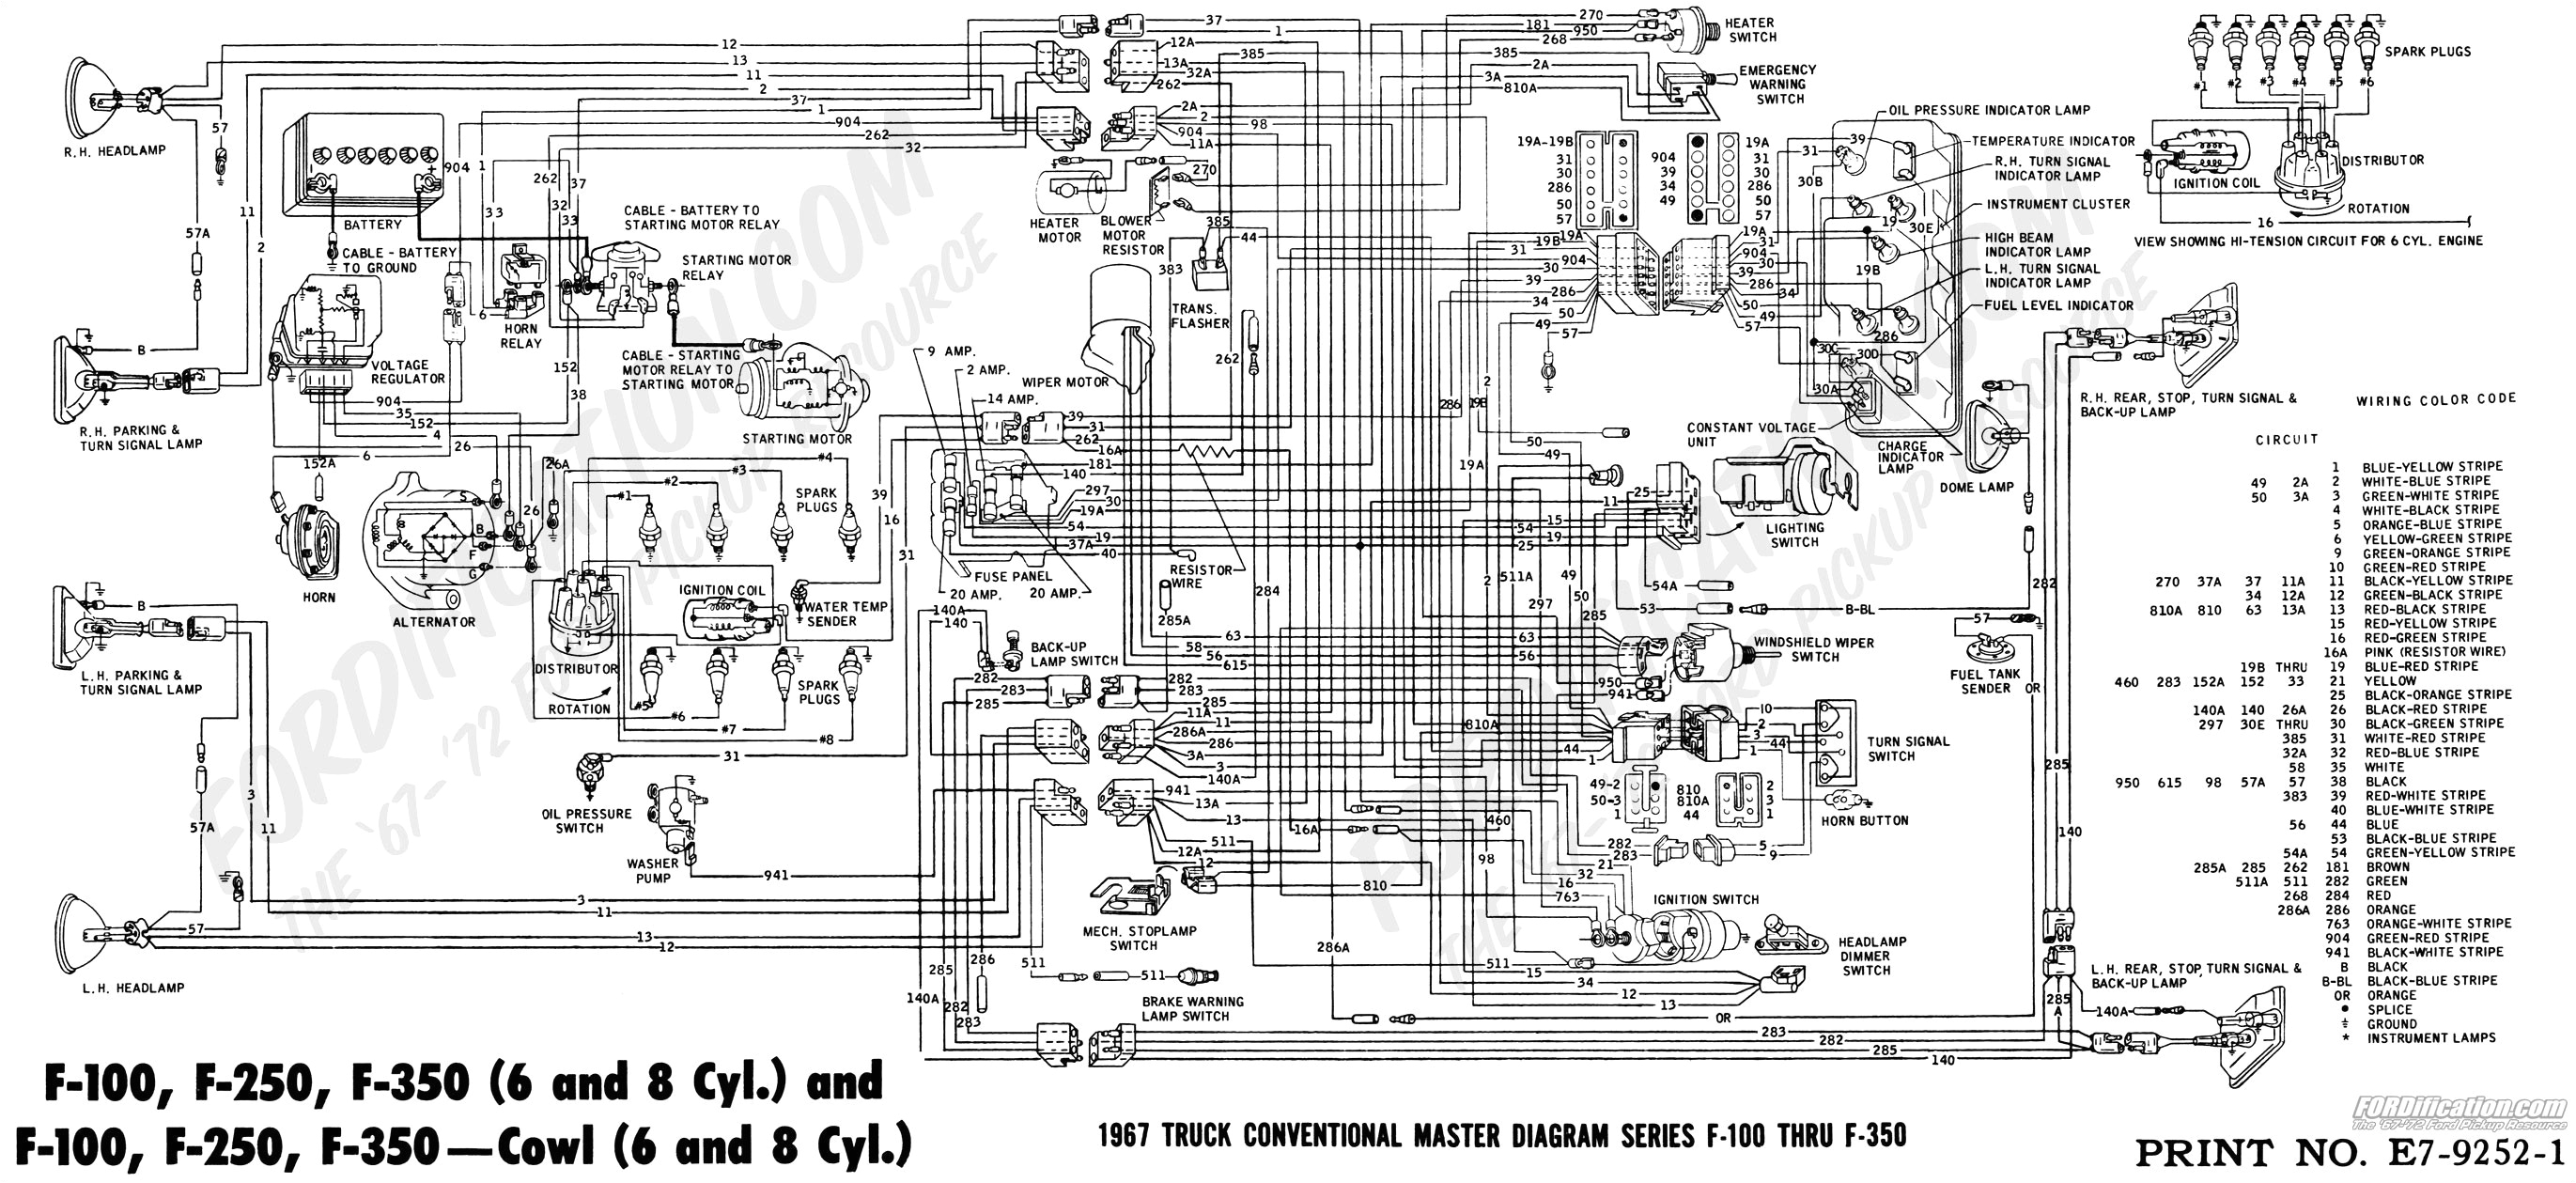 1991 ford f150 wiring schematic use wiring diagram 91 ford f 150 wiring diagram